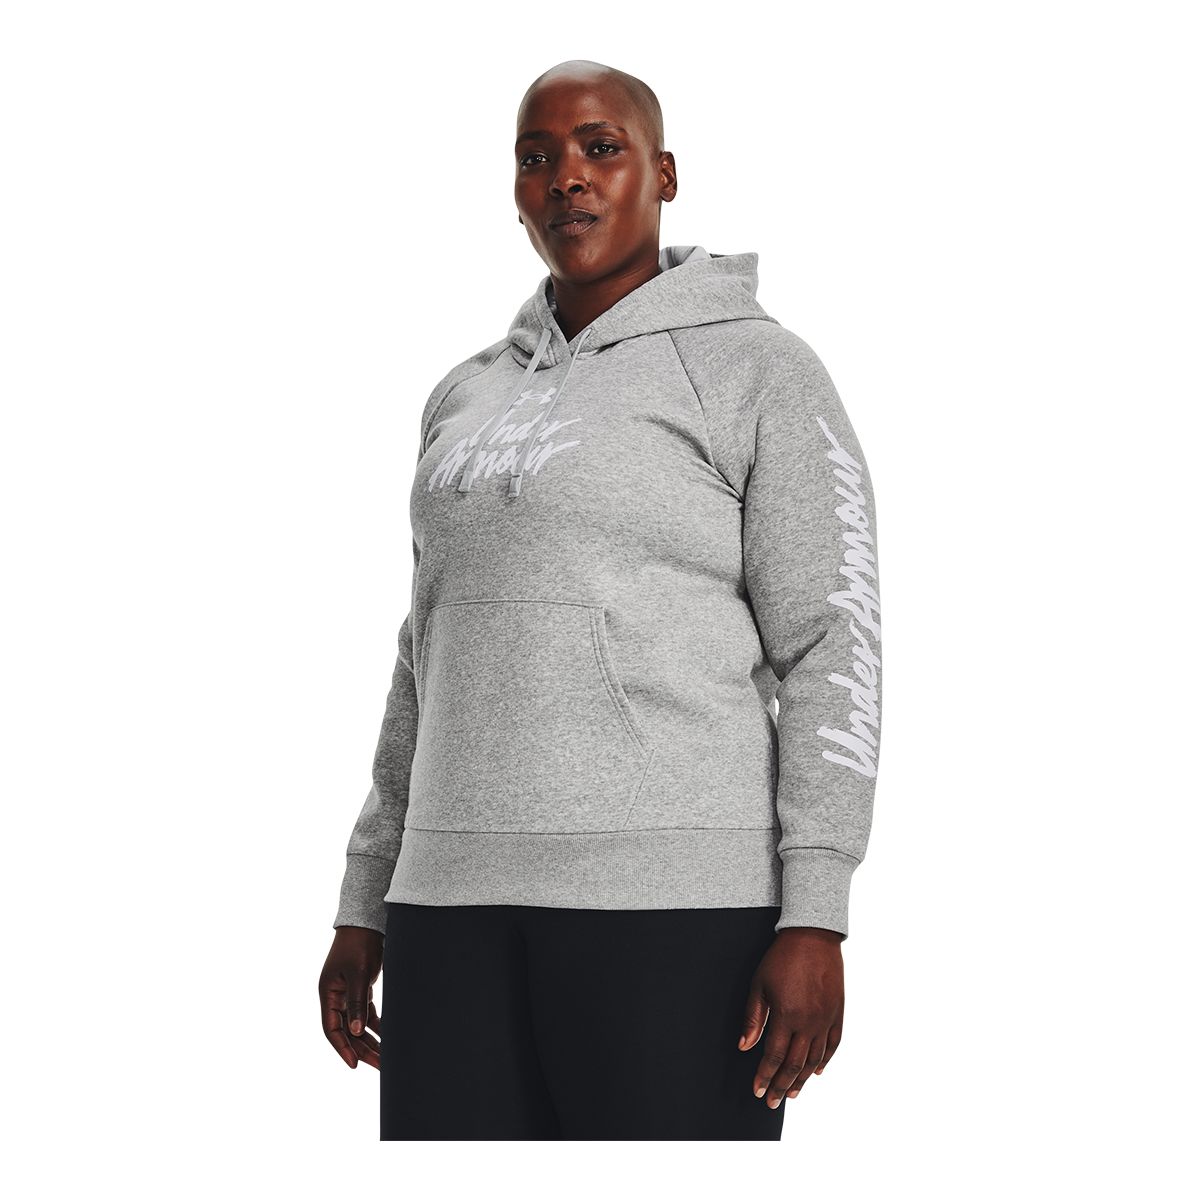 Under Armour Women's ColdGear® Infrared® Pullover Hoodie, Anti